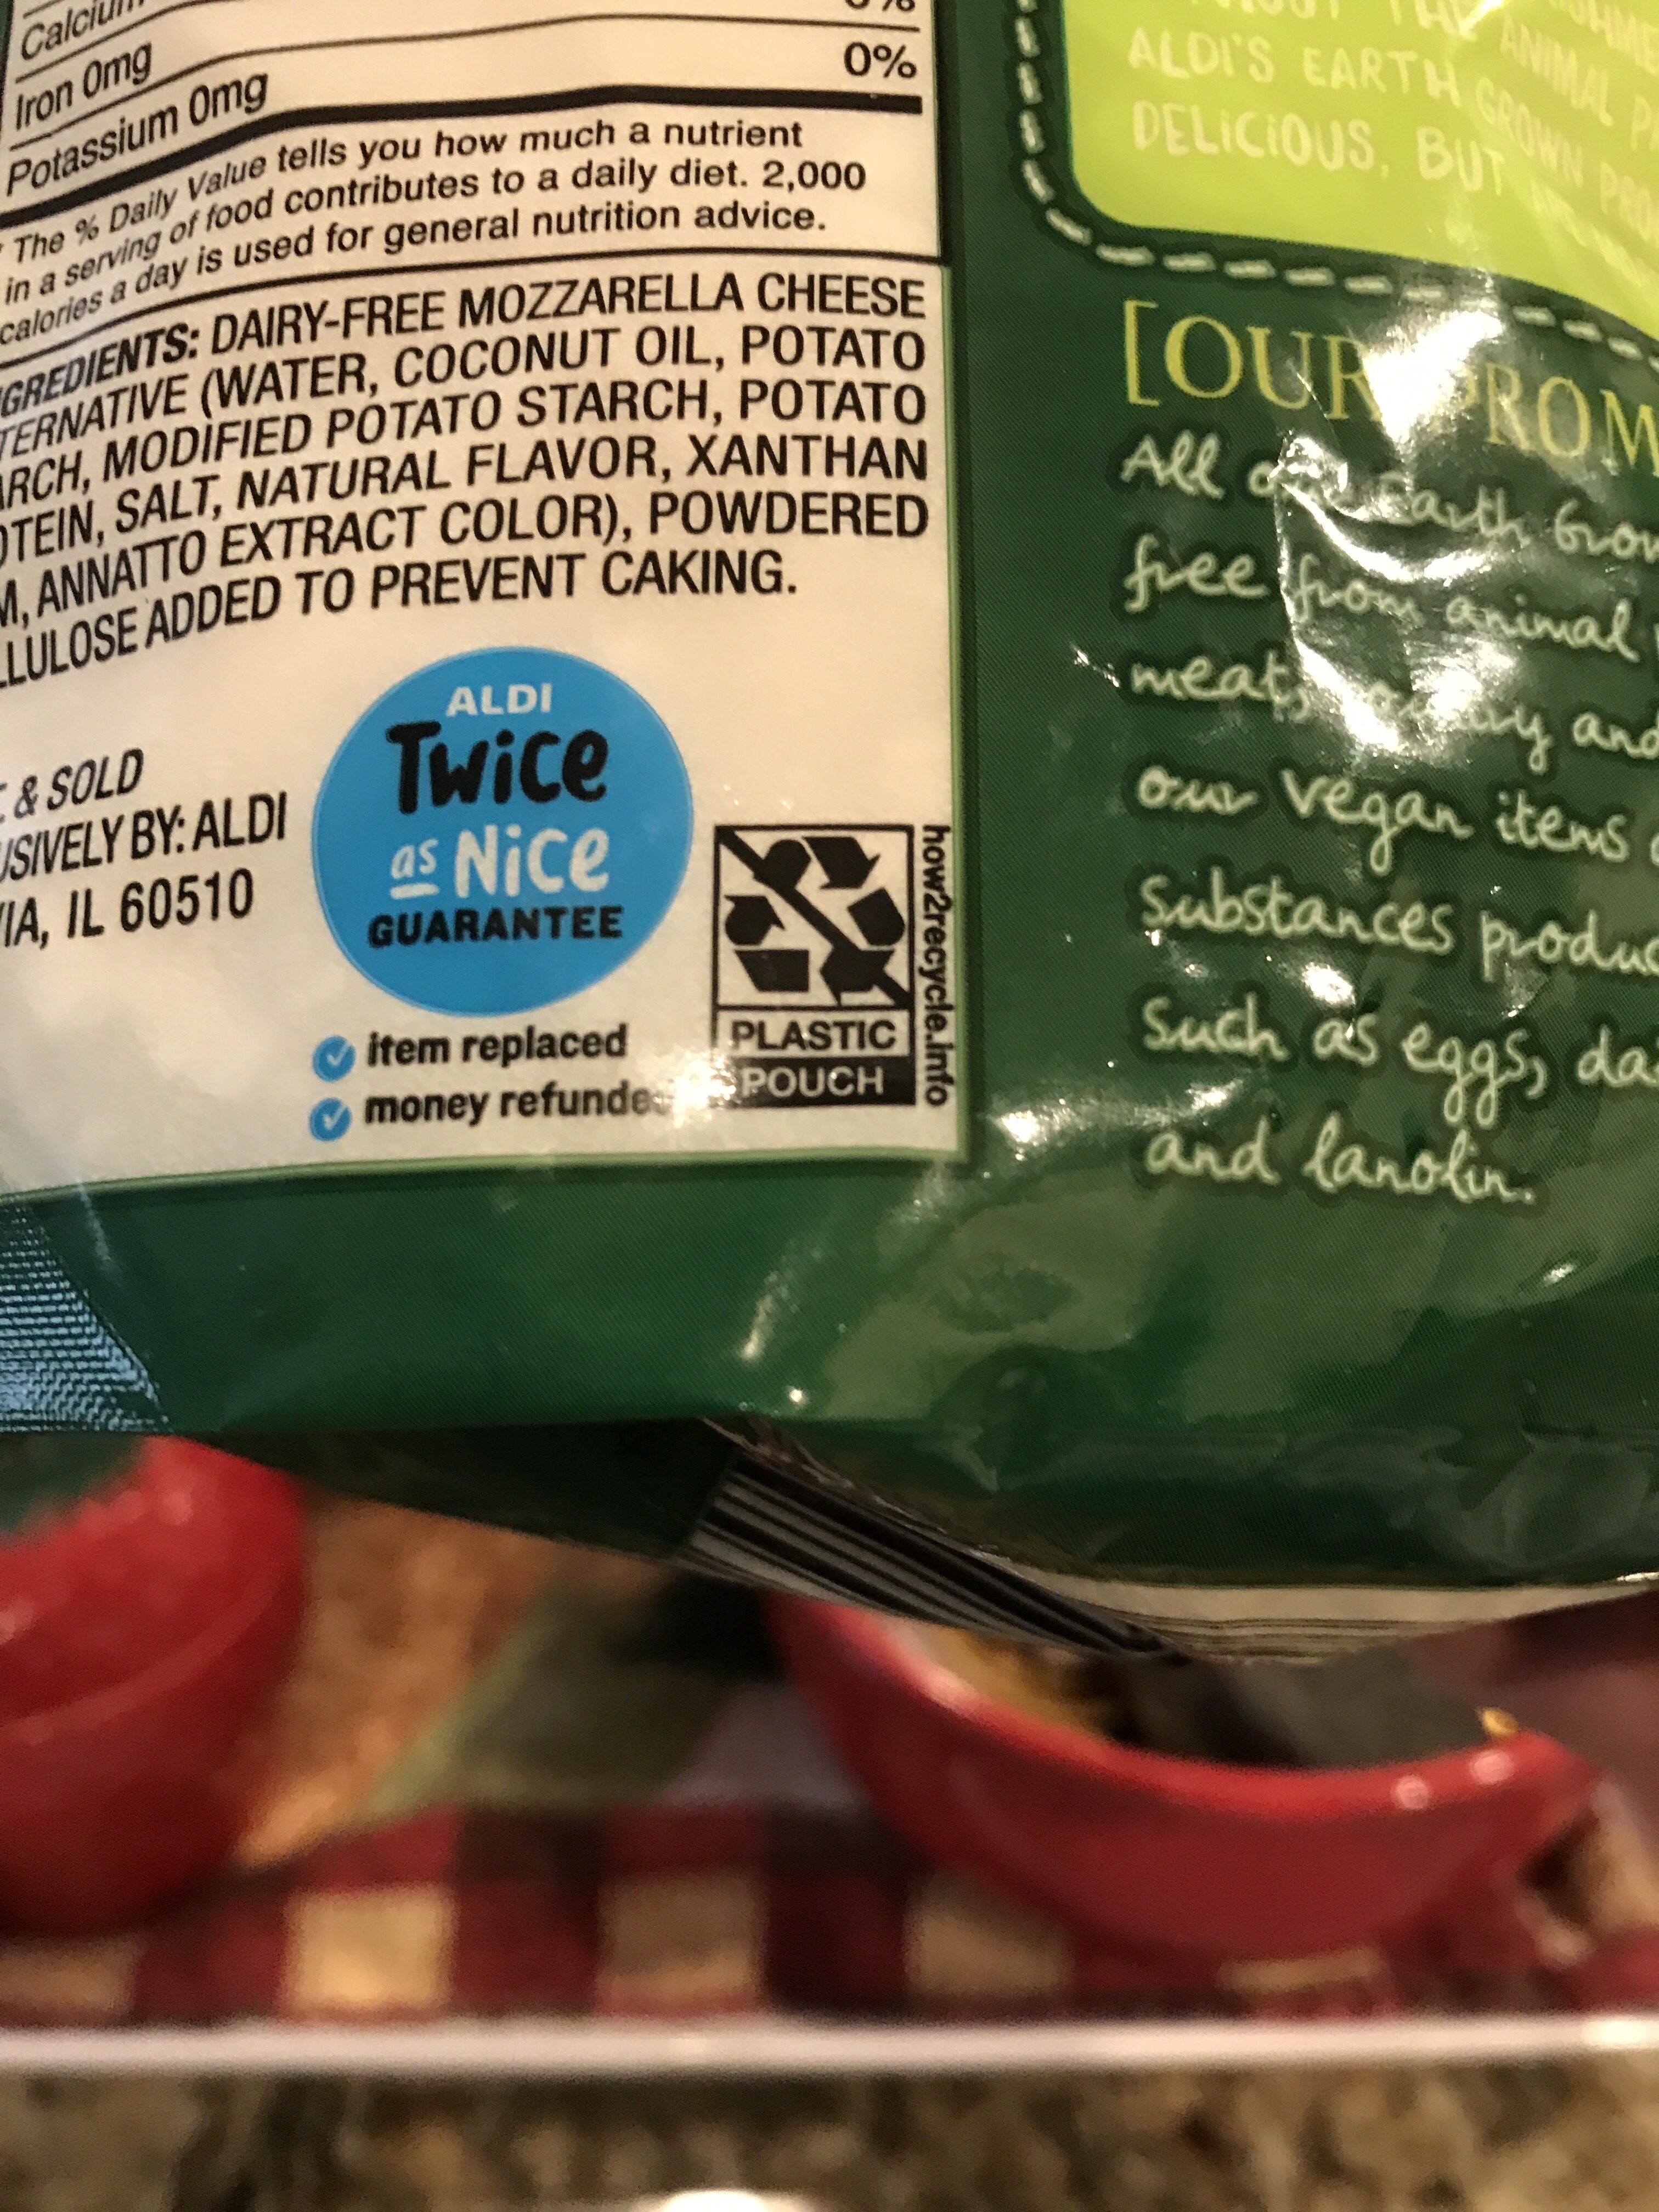 Audi’s Earth Grown Vegan Mazzarlla Cheese Alternative - Recycling instructions and/or packaging information